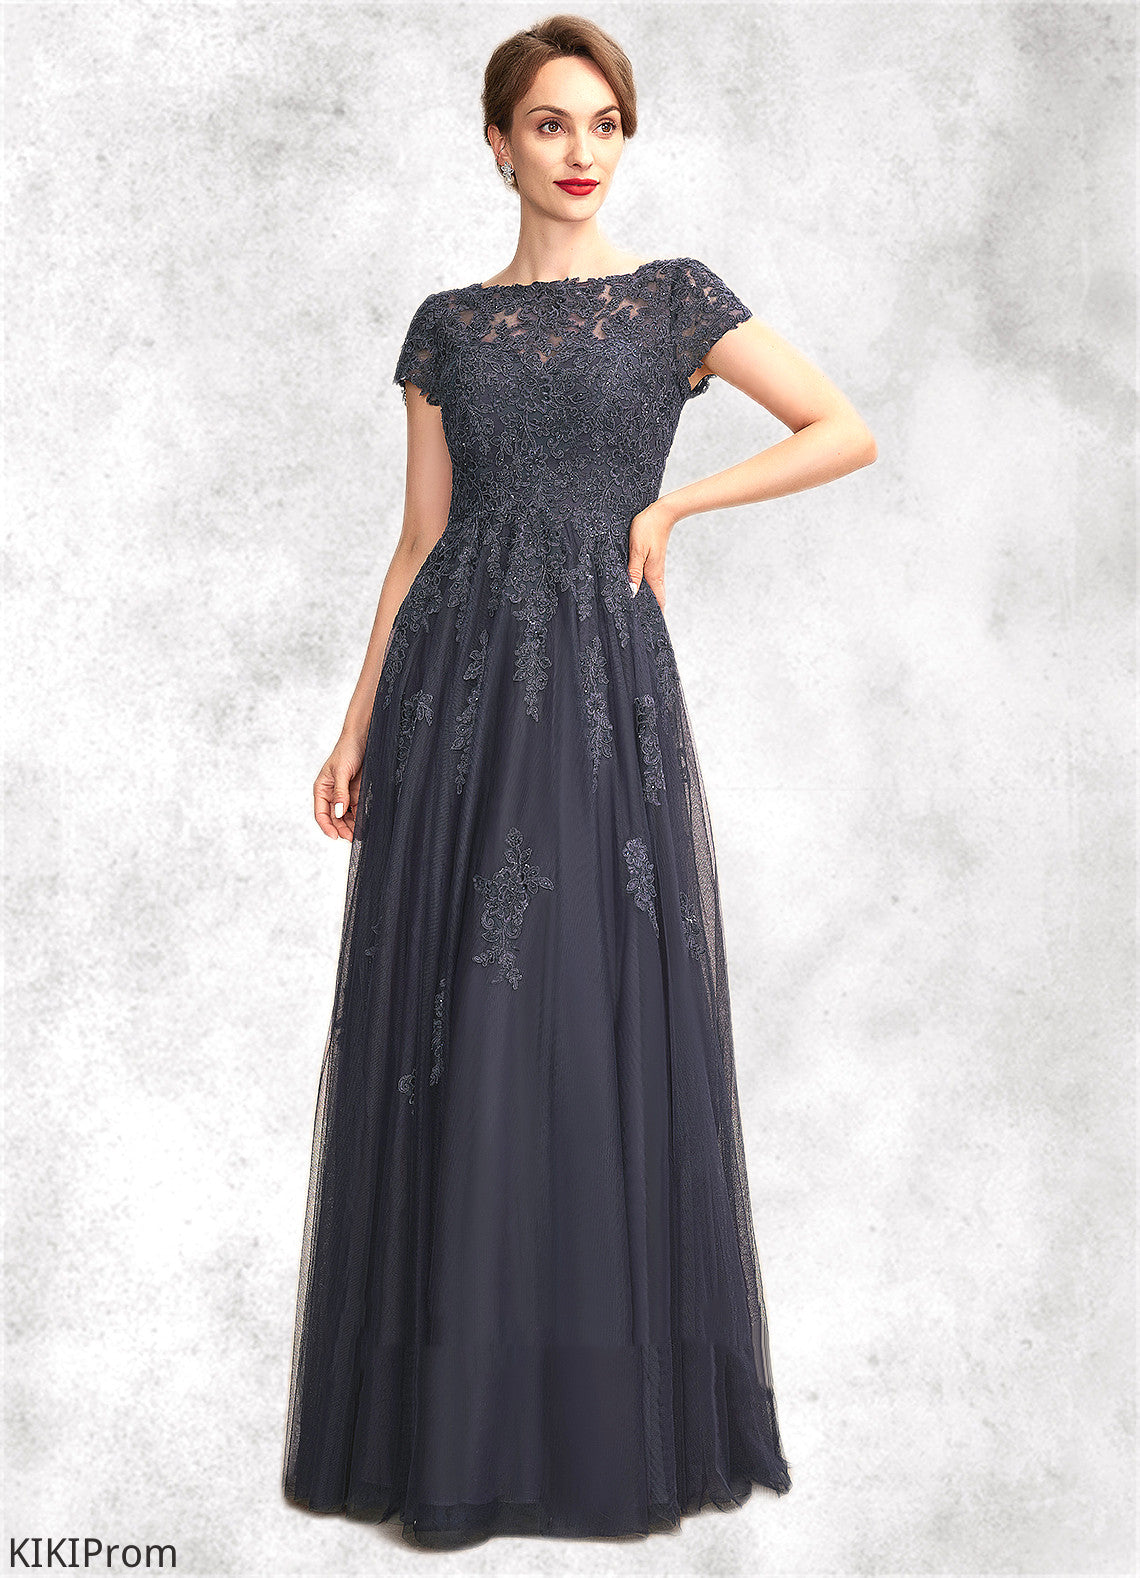 Eliza A-Line Scoop Neck Floor-Length Tulle Lace Mother of the Bride Dress With Beading DZ126P0015029